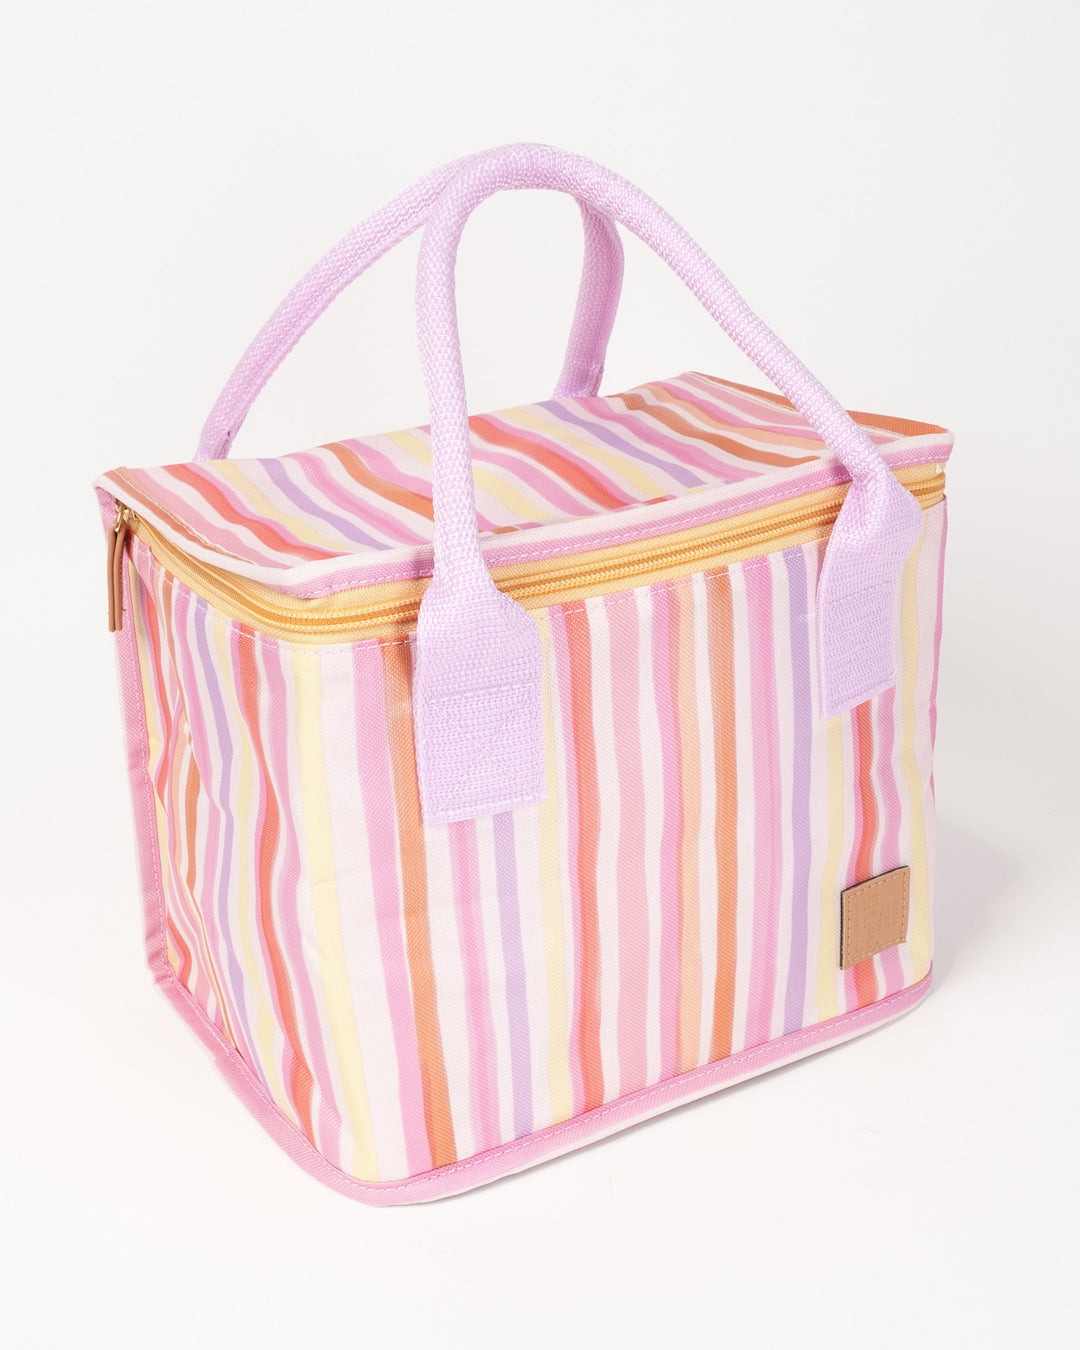 Cirque Lunch Bag with Canvas Handle